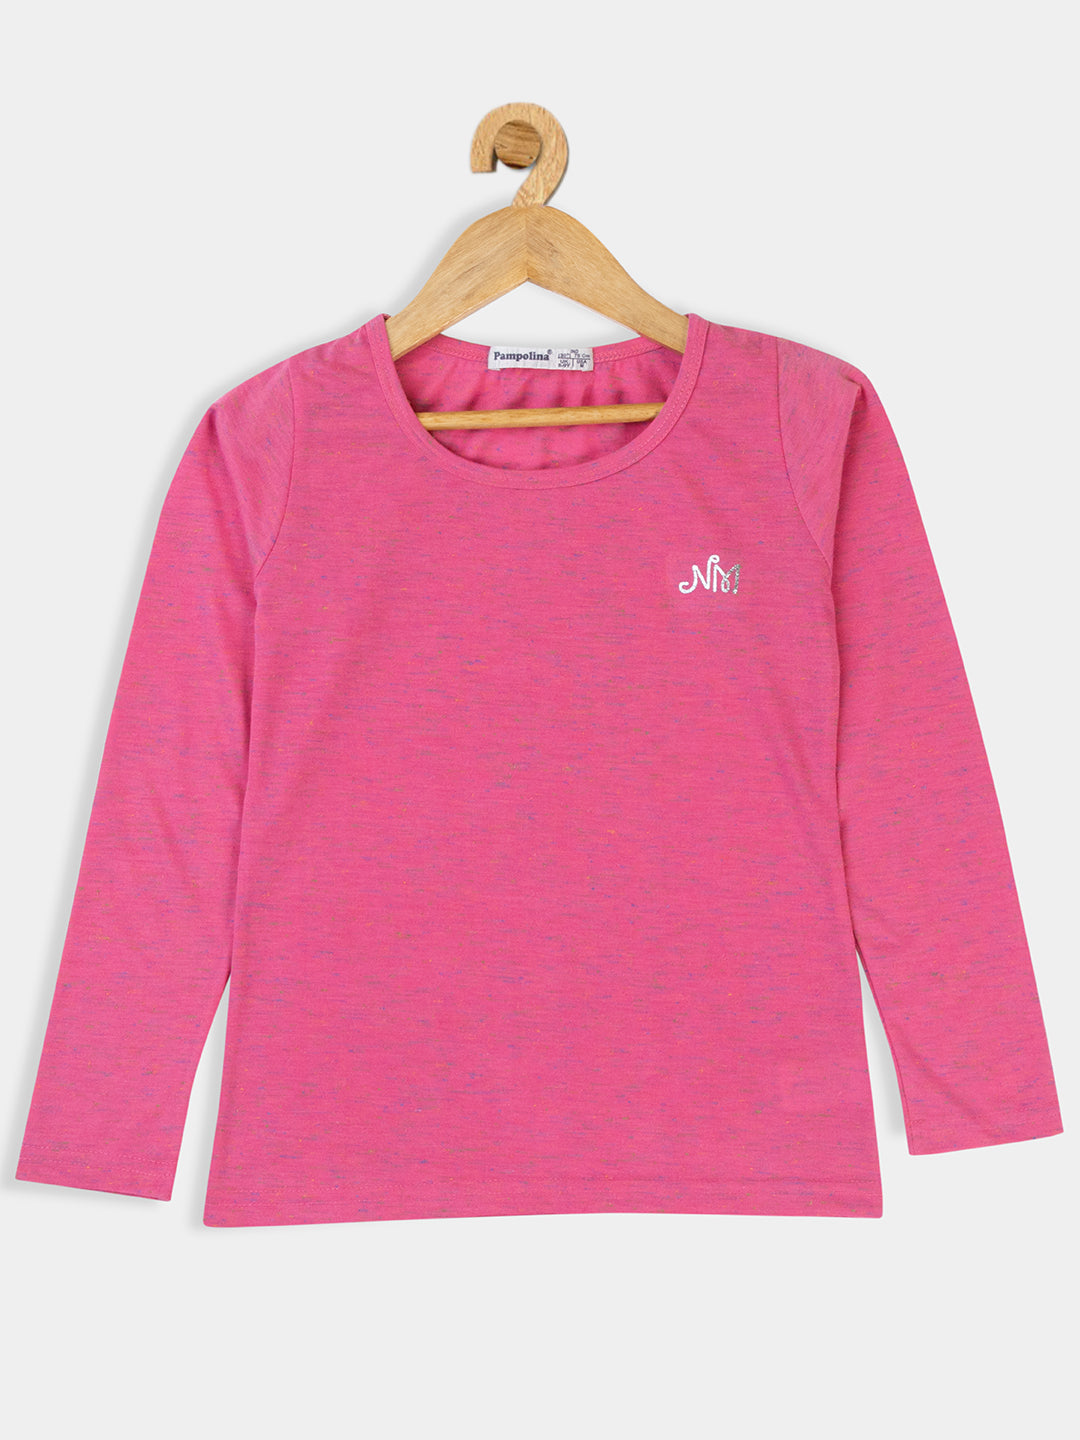 Pampolina Girls Solid Top- Pink